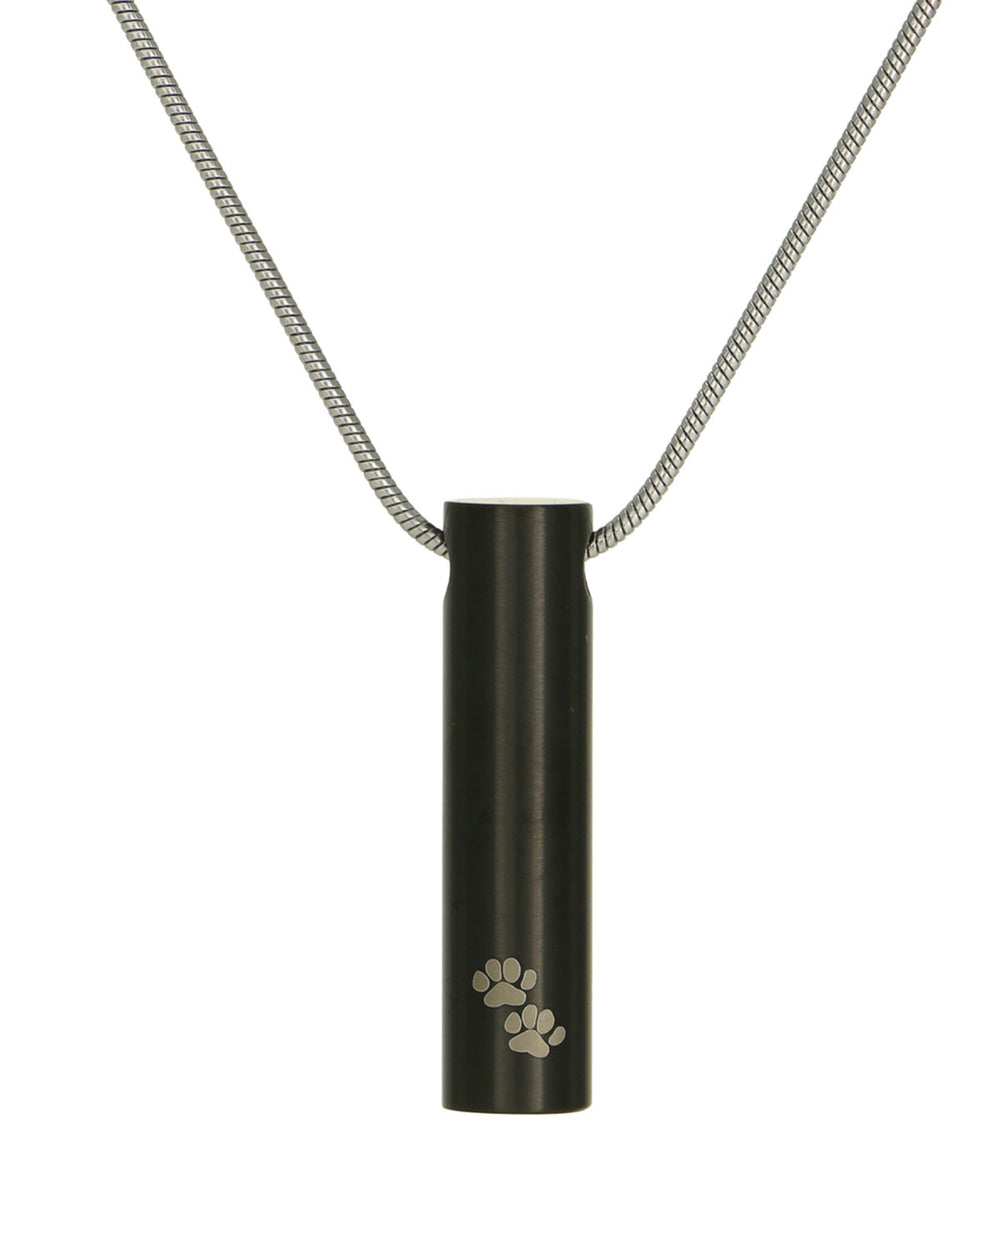 Cylinder Jewelry Pendant - Onyx with Paws